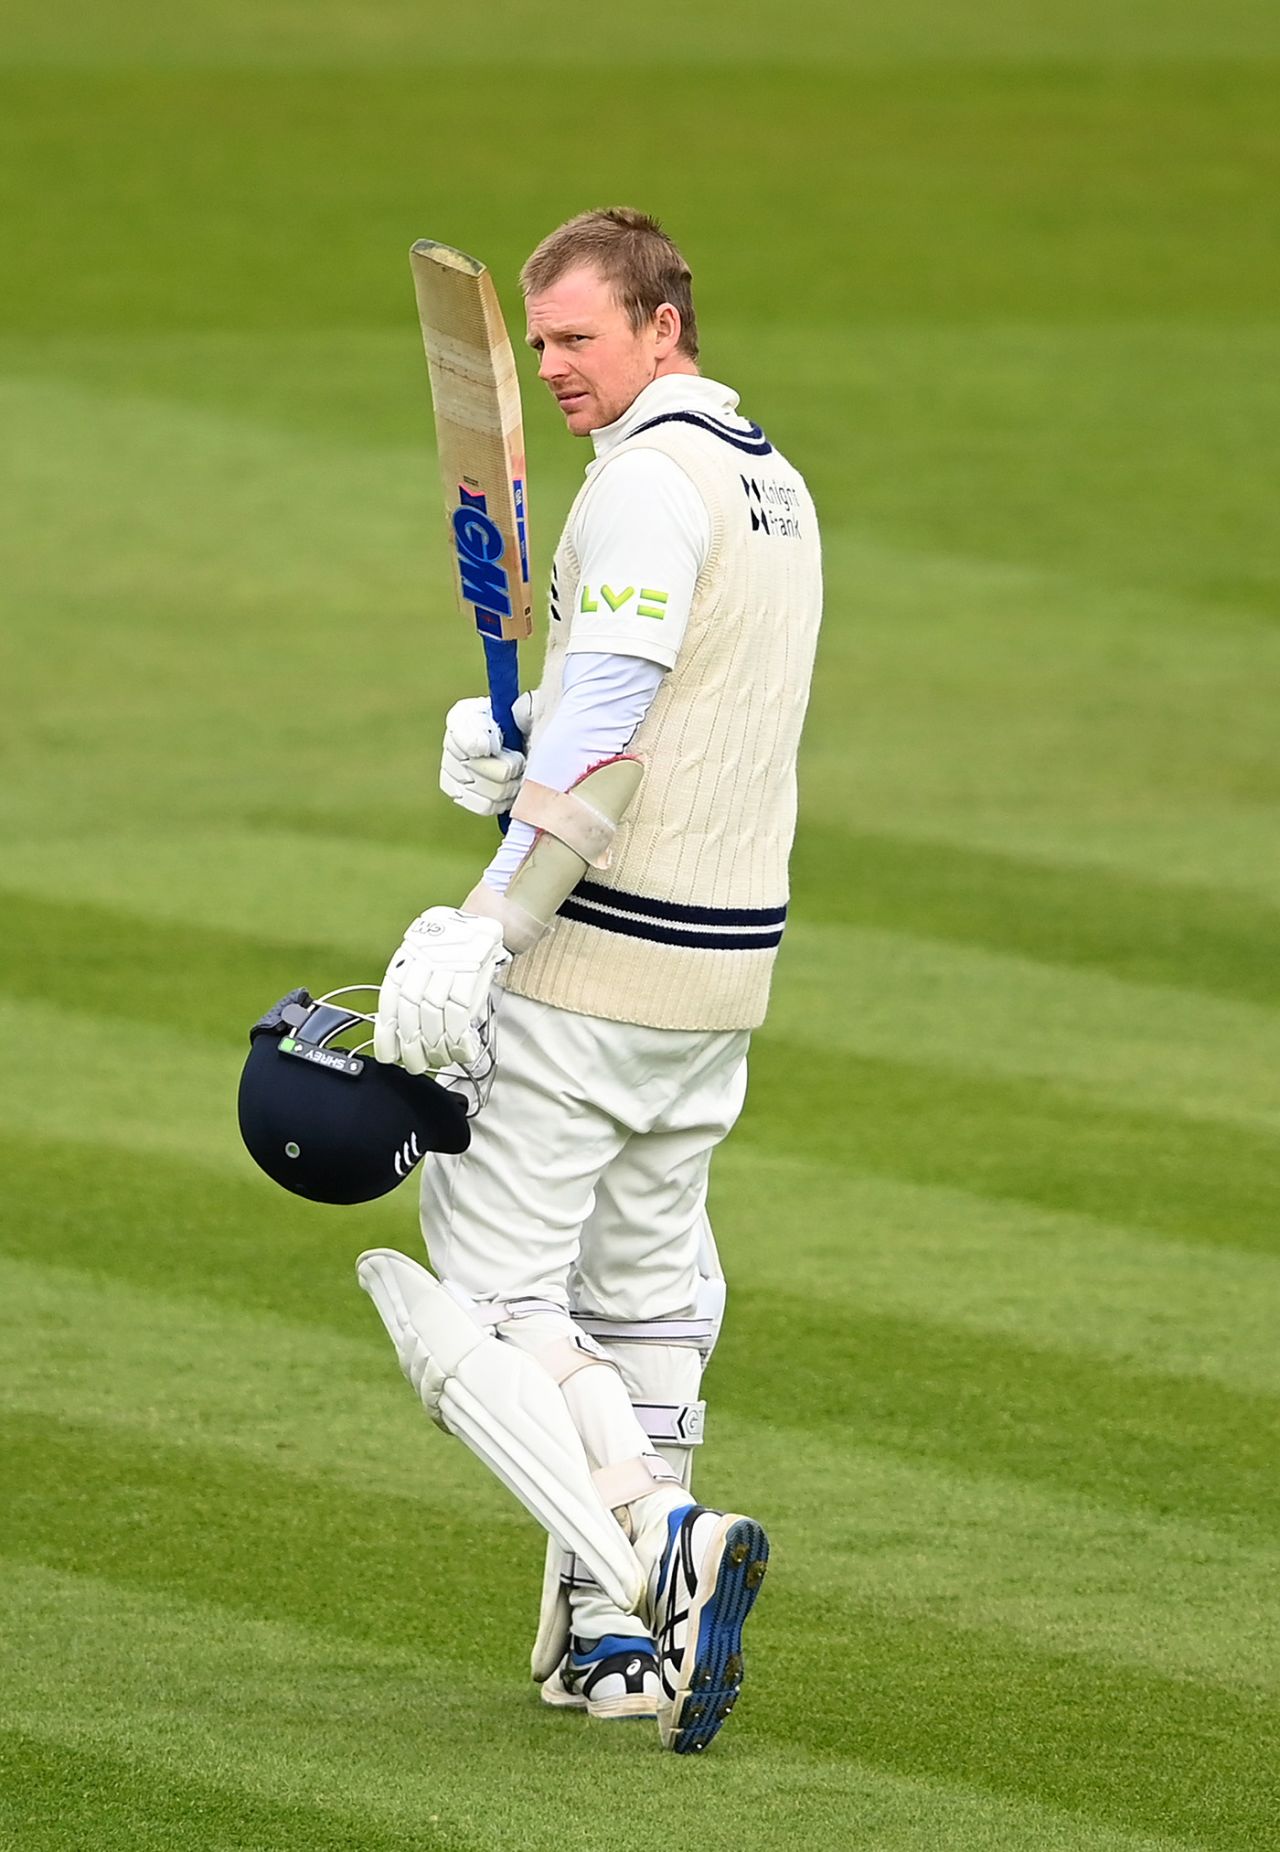 Sam Robson recorded the first hundred of the Championship season, Middlesex vs Somerset, County Championship, Lord's, April 8, 2021